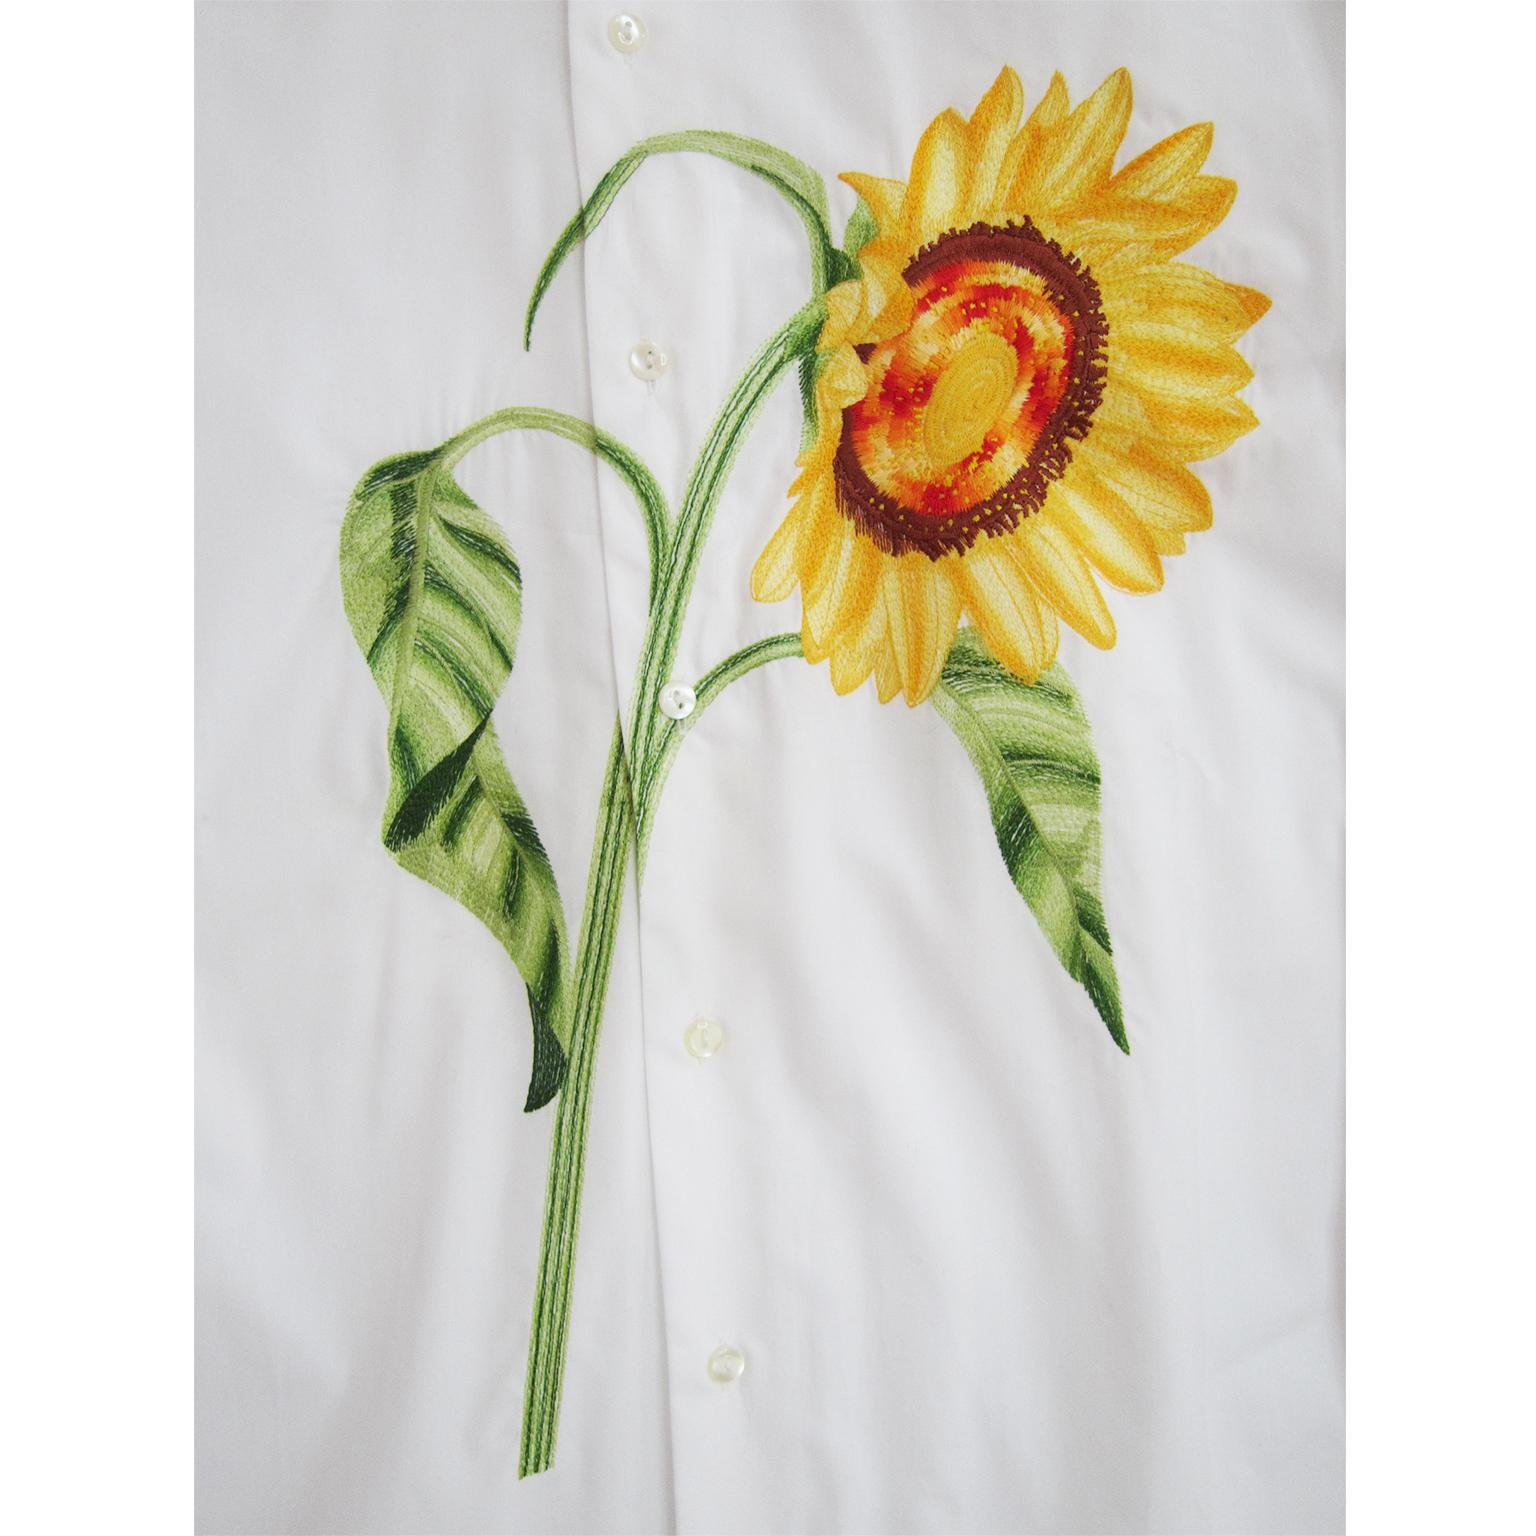 Kenzo Paris white mens shirt with large bright sunflower embroidery from 1980s.
New with Tag.
Size L
Underarm :  62 cm
Sleeve : 60 cm
Length : 82 cm

